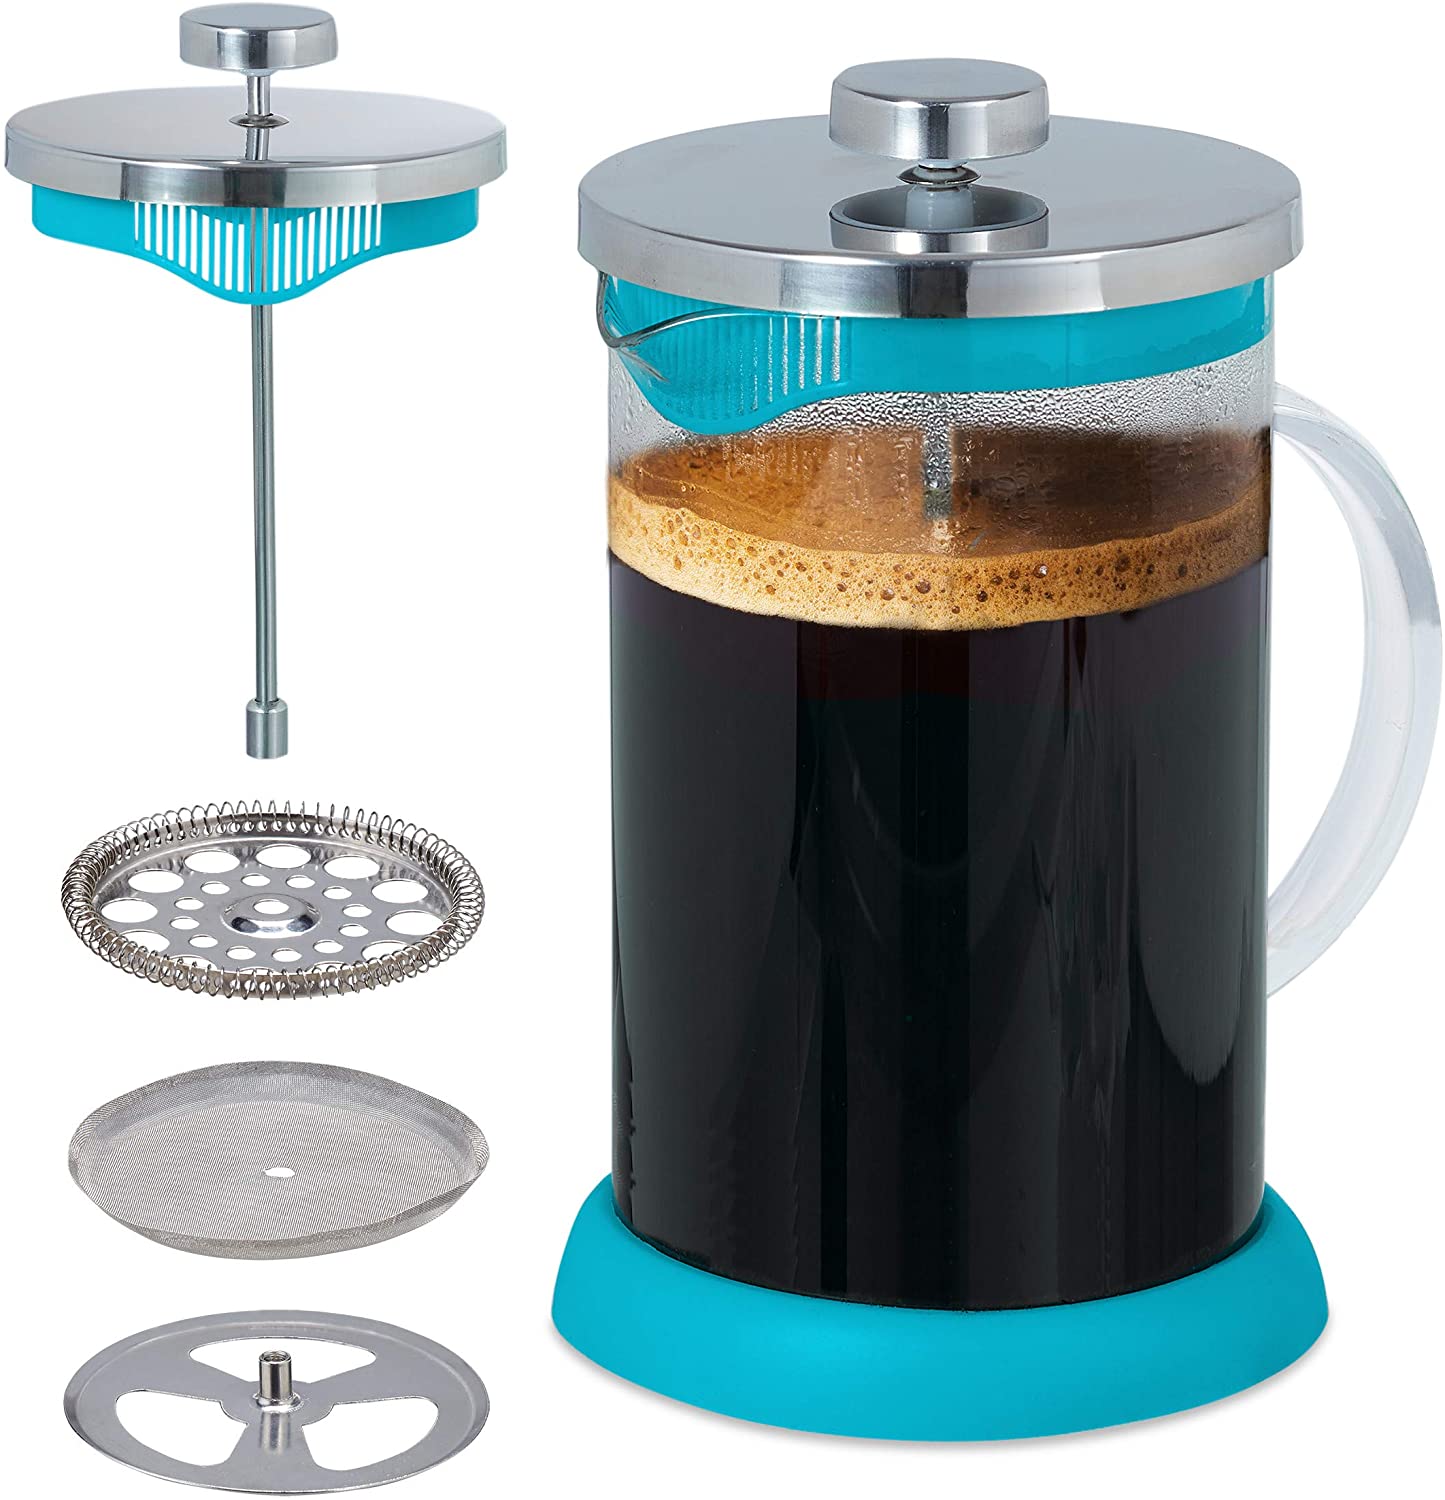 Relaxdays Coffee Maker, Stainless Steel Strainer, Flavoured Coffee Enjoy, 800 ml, Glass & Plastic, Coffee Press Colours., light blue